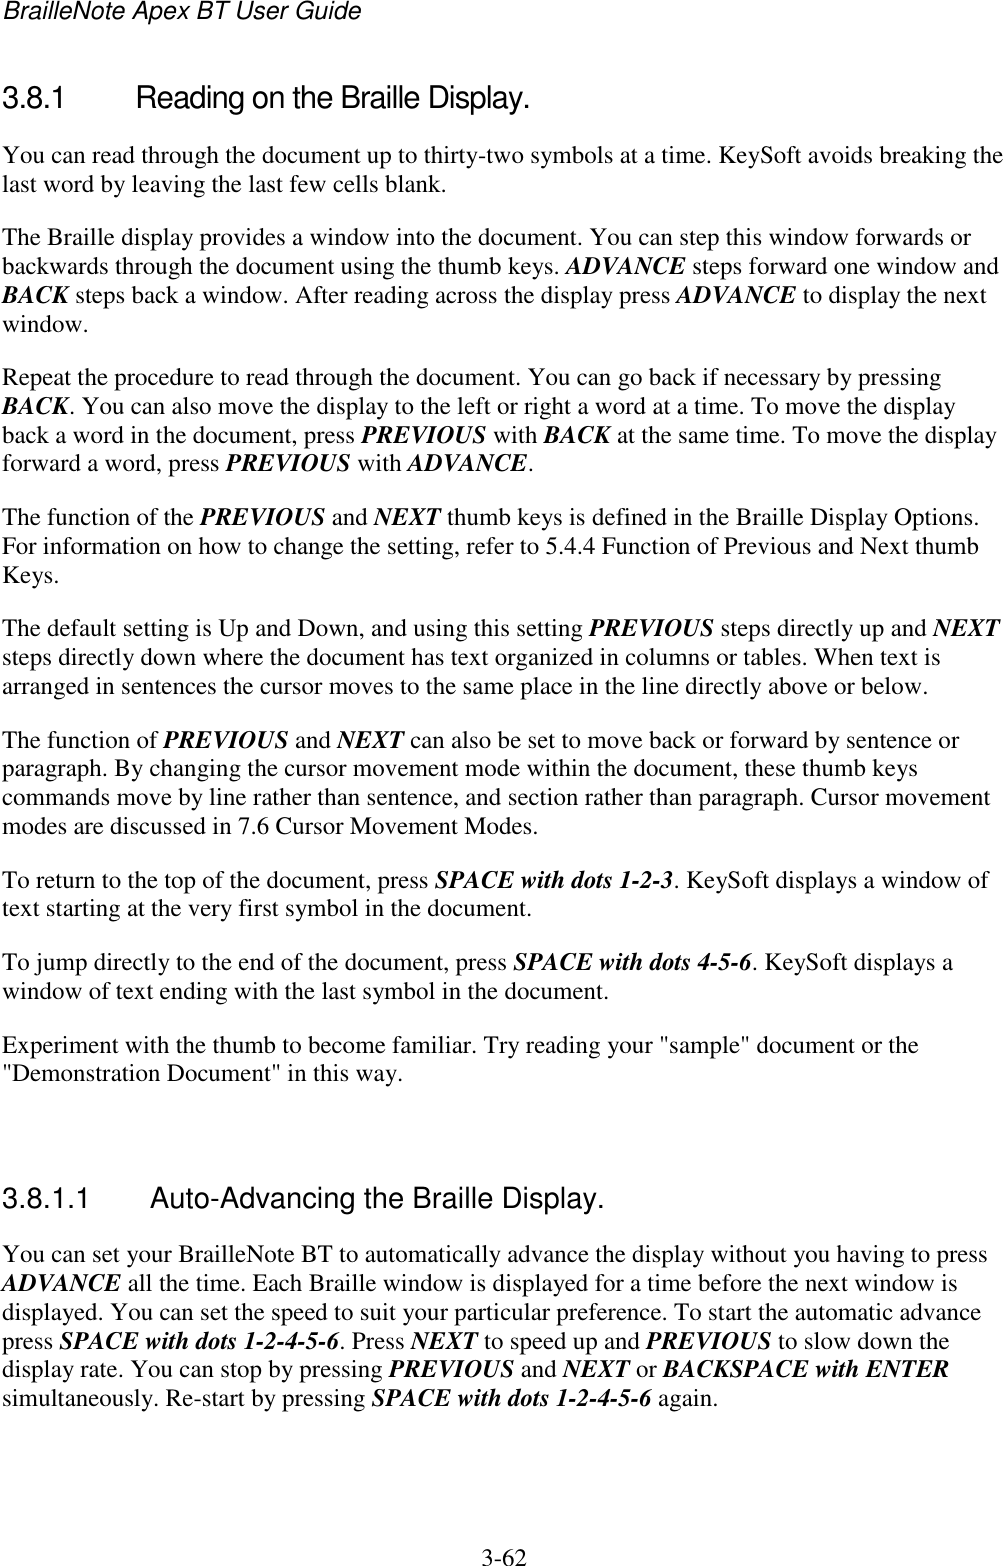 BrailleNote Apex BT User Guide   3-62   3.8.1  Reading on the Braille Display. You can read through the document up to thirty-two symbols at a time. KeySoft avoids breaking the last word by leaving the last few cells blank. The Braille display provides a window into the document. You can step this window forwards or backwards through the document using the thumb keys. ADVANCE steps forward one window and BACK steps back a window. After reading across the display press ADVANCE to display the next window. Repeat the procedure to read through the document. You can go back if necessary by pressing BACK. You can also move the display to the left or right a word at a time. To move the display back a word in the document, press PREVIOUS with BACK at the same time. To move the display forward a word, press PREVIOUS with ADVANCE. The function of the PREVIOUS and NEXT thumb keys is defined in the Braille Display Options. For information on how to change the setting, refer to 5.4.4 Function of Previous and Next thumb Keys. The default setting is Up and Down, and using this setting PREVIOUS steps directly up and NEXT steps directly down where the document has text organized in columns or tables. When text is arranged in sentences the cursor moves to the same place in the line directly above or below. The function of PREVIOUS and NEXT can also be set to move back or forward by sentence or paragraph. By changing the cursor movement mode within the document, these thumb keys commands move by line rather than sentence, and section rather than paragraph. Cursor movement modes are discussed in 7.6 Cursor Movement Modes. To return to the top of the document, press SPACE with dots 1-2-3. KeySoft displays a window of text starting at the very first symbol in the document. To jump directly to the end of the document, press SPACE with dots 4-5-6. KeySoft displays a window of text ending with the last symbol in the document. Experiment with the thumb to become familiar. Try reading your &quot;sample&quot; document or the &quot;Demonstration Document&quot; in this way.   3.8.1.1  Auto-Advancing the Braille Display. You can set your BrailleNote BT to automatically advance the display without you having to press ADVANCE all the time. Each Braille window is displayed for a time before the next window is displayed. You can set the speed to suit your particular preference. To start the automatic advance press SPACE with dots 1-2-4-5-6. Press NEXT to speed up and PREVIOUS to slow down the display rate. You can stop by pressing PREVIOUS and NEXT or BACKSPACE with ENTER simultaneously. Re-start by pressing SPACE with dots 1-2-4-5-6 again.   